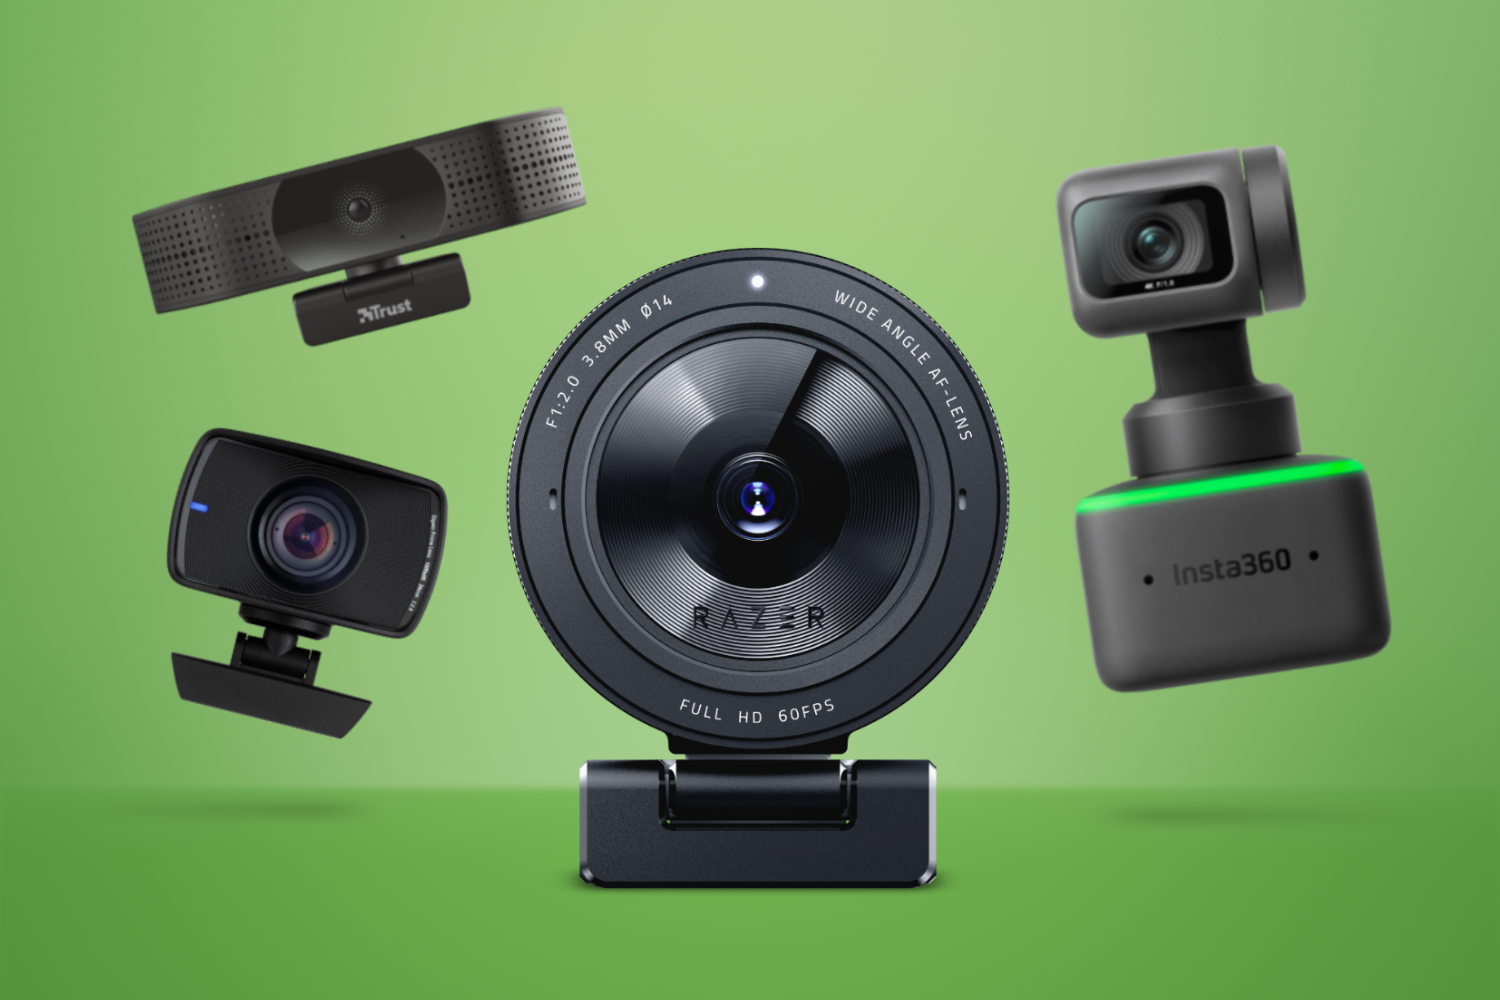 Best streaming webcam you can get rn 🙌 #streamingtips